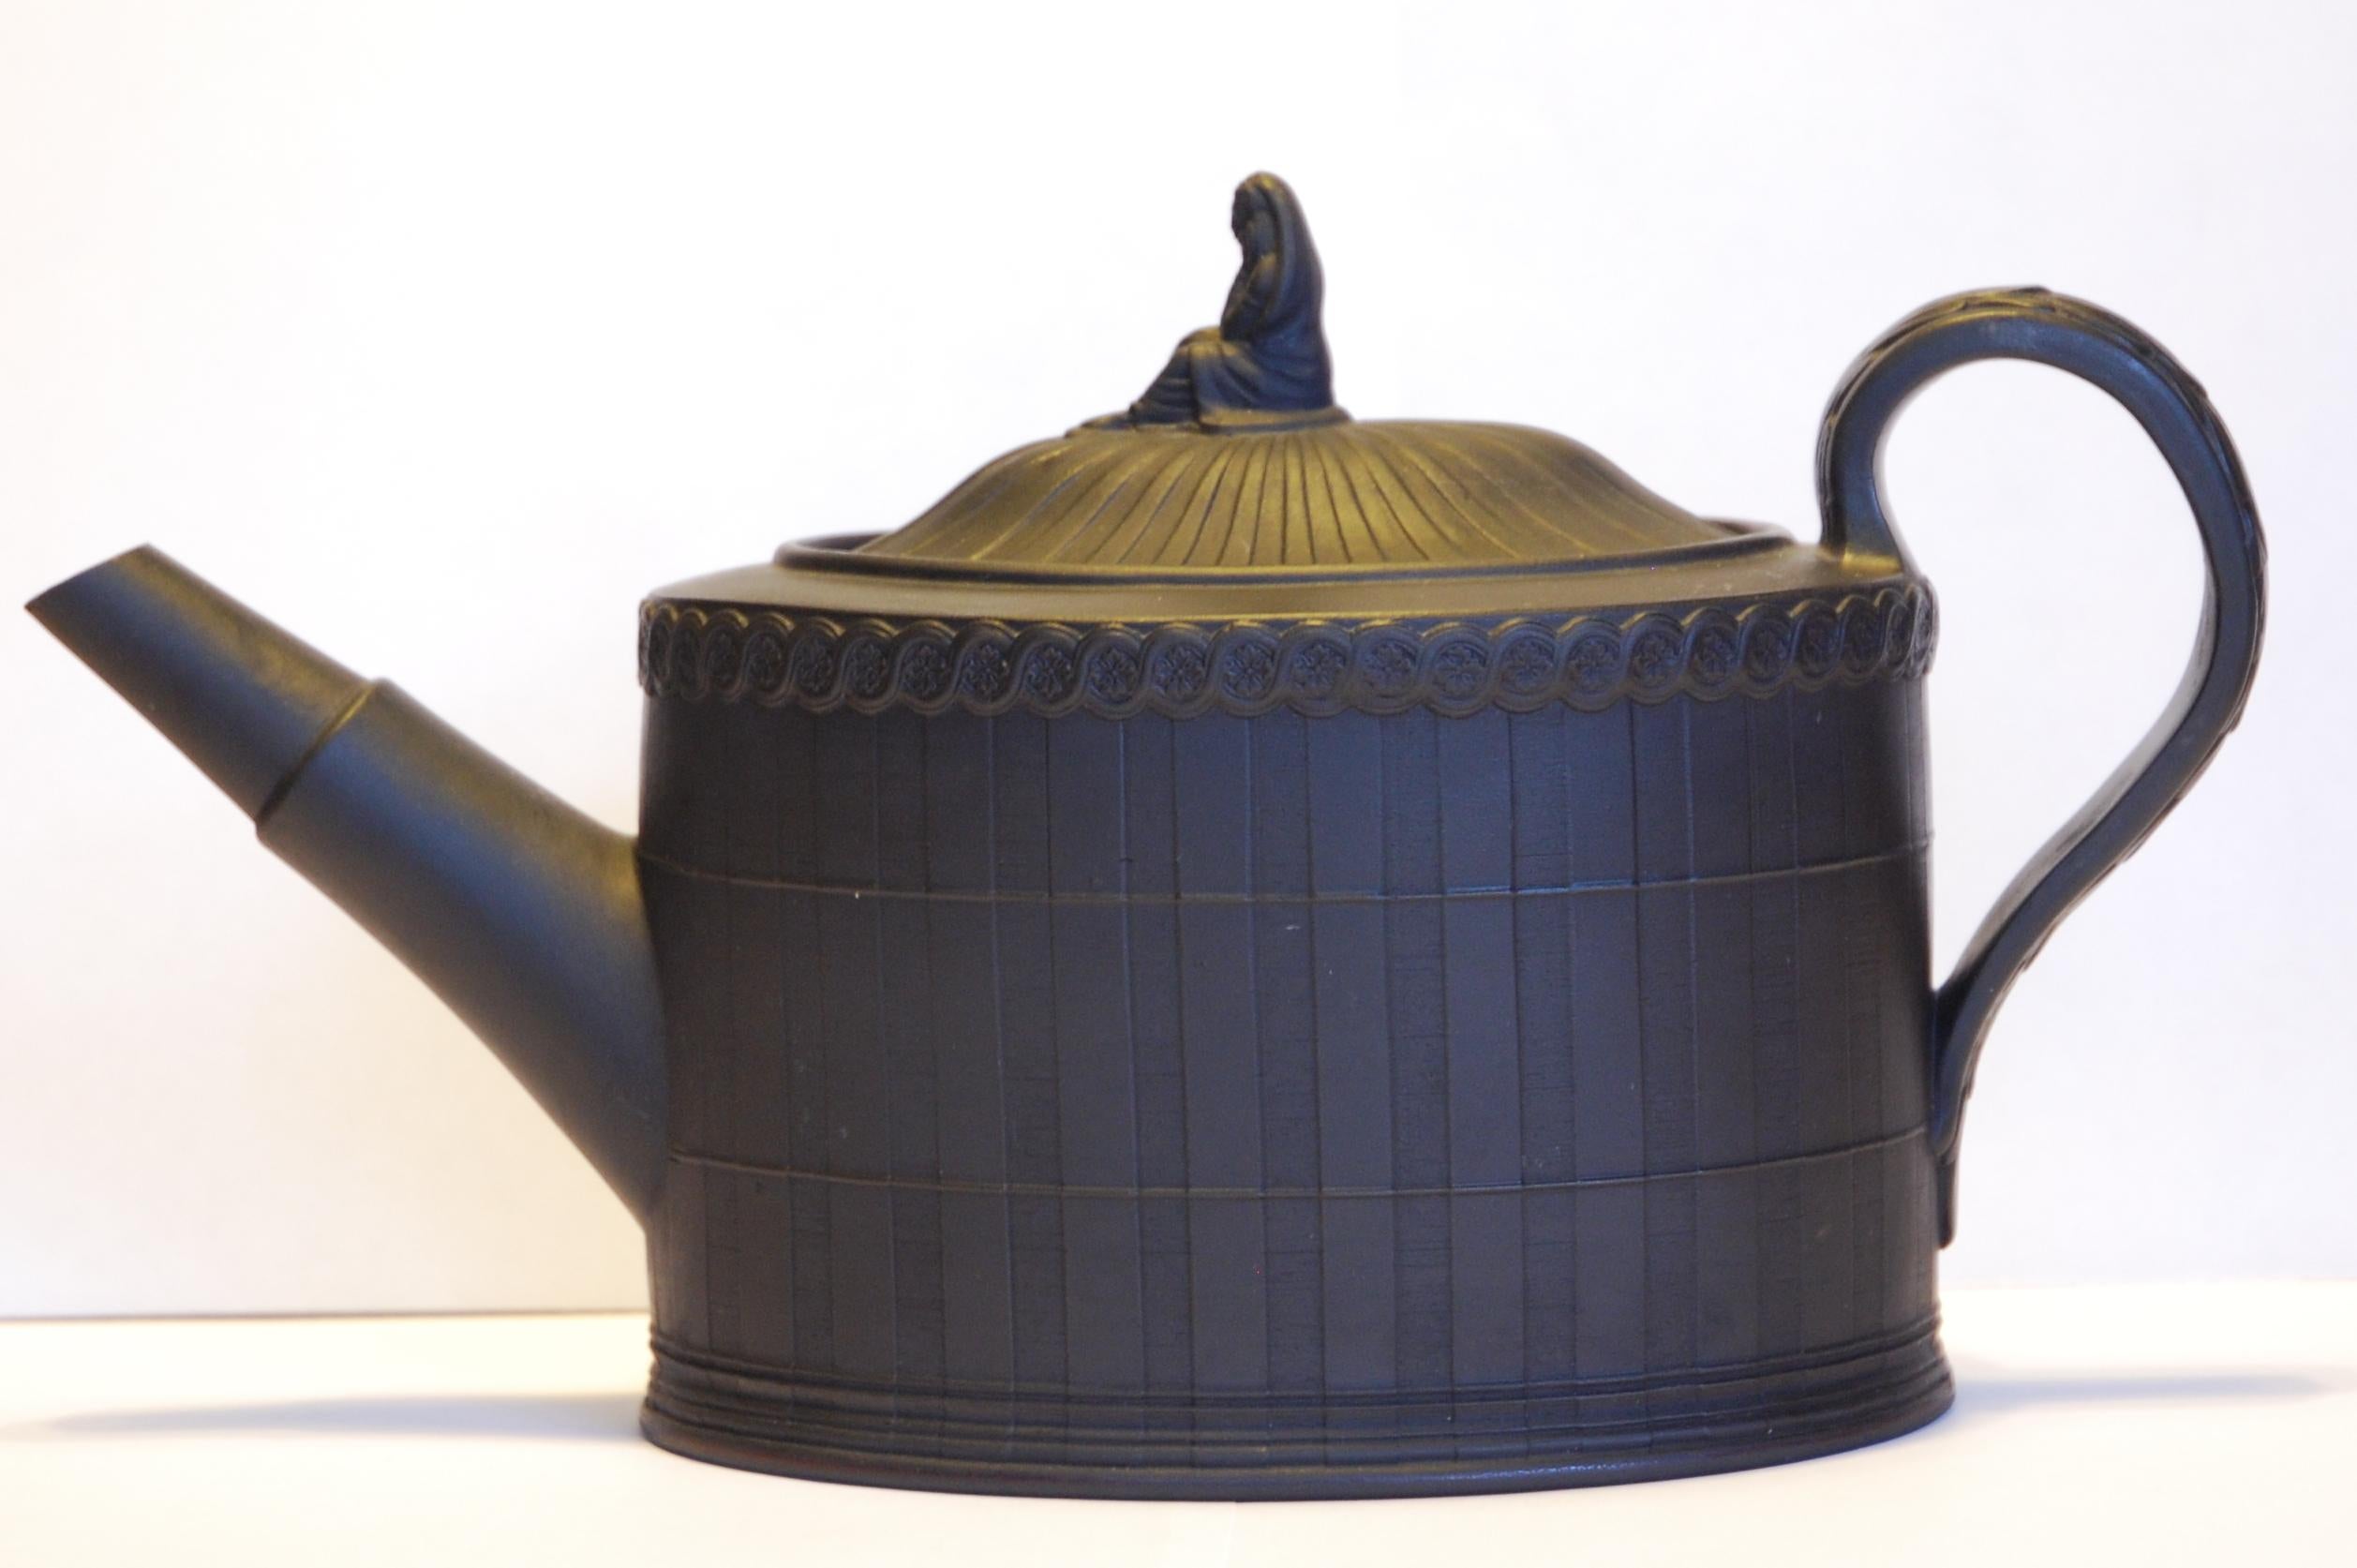 An excellent black basalt teapot, with engine turned decoration and widow finial. Most unusually, this example is marked.